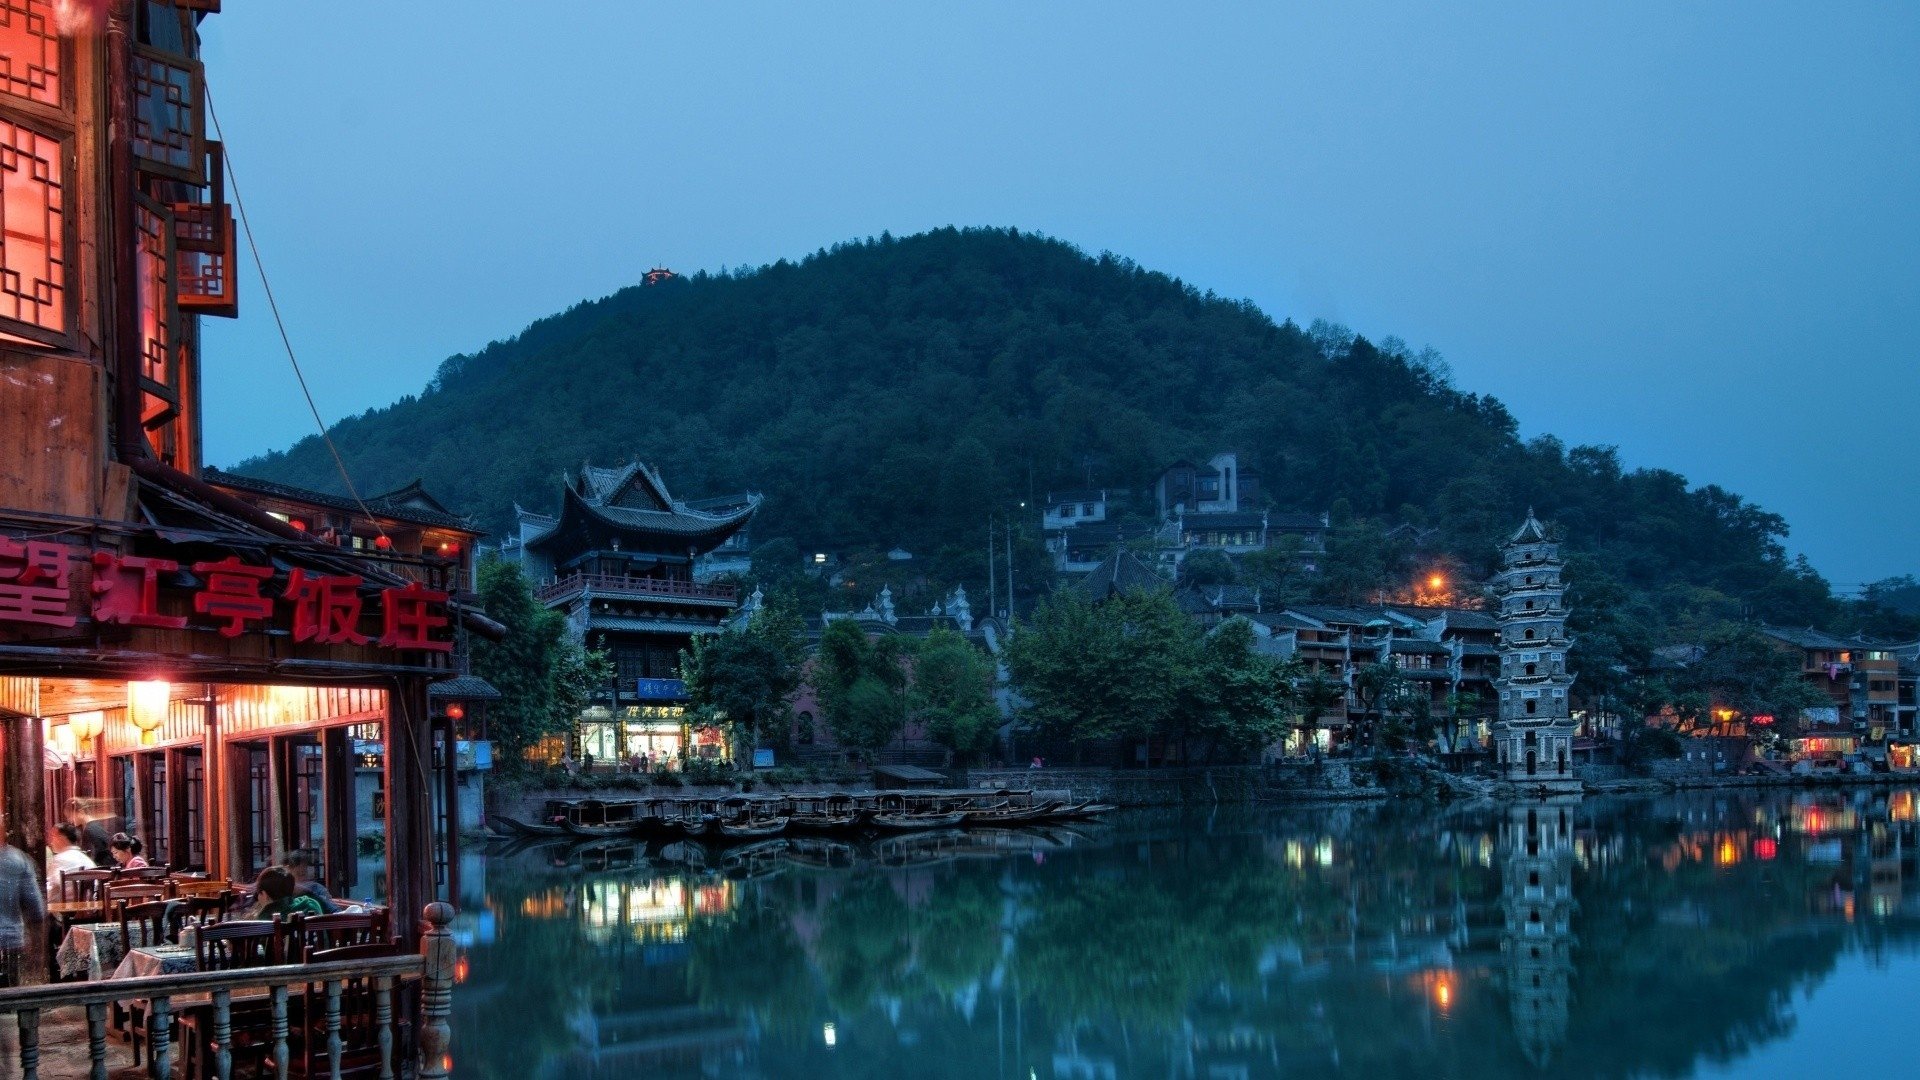 china, House, Buildings, Hills, Trees, Lake, Water, Night, Sunset, Lights, City, Landscape, Reflection, Town, Asian, Oriental, Village Wallpaper HD / Desktop and Mobile Background